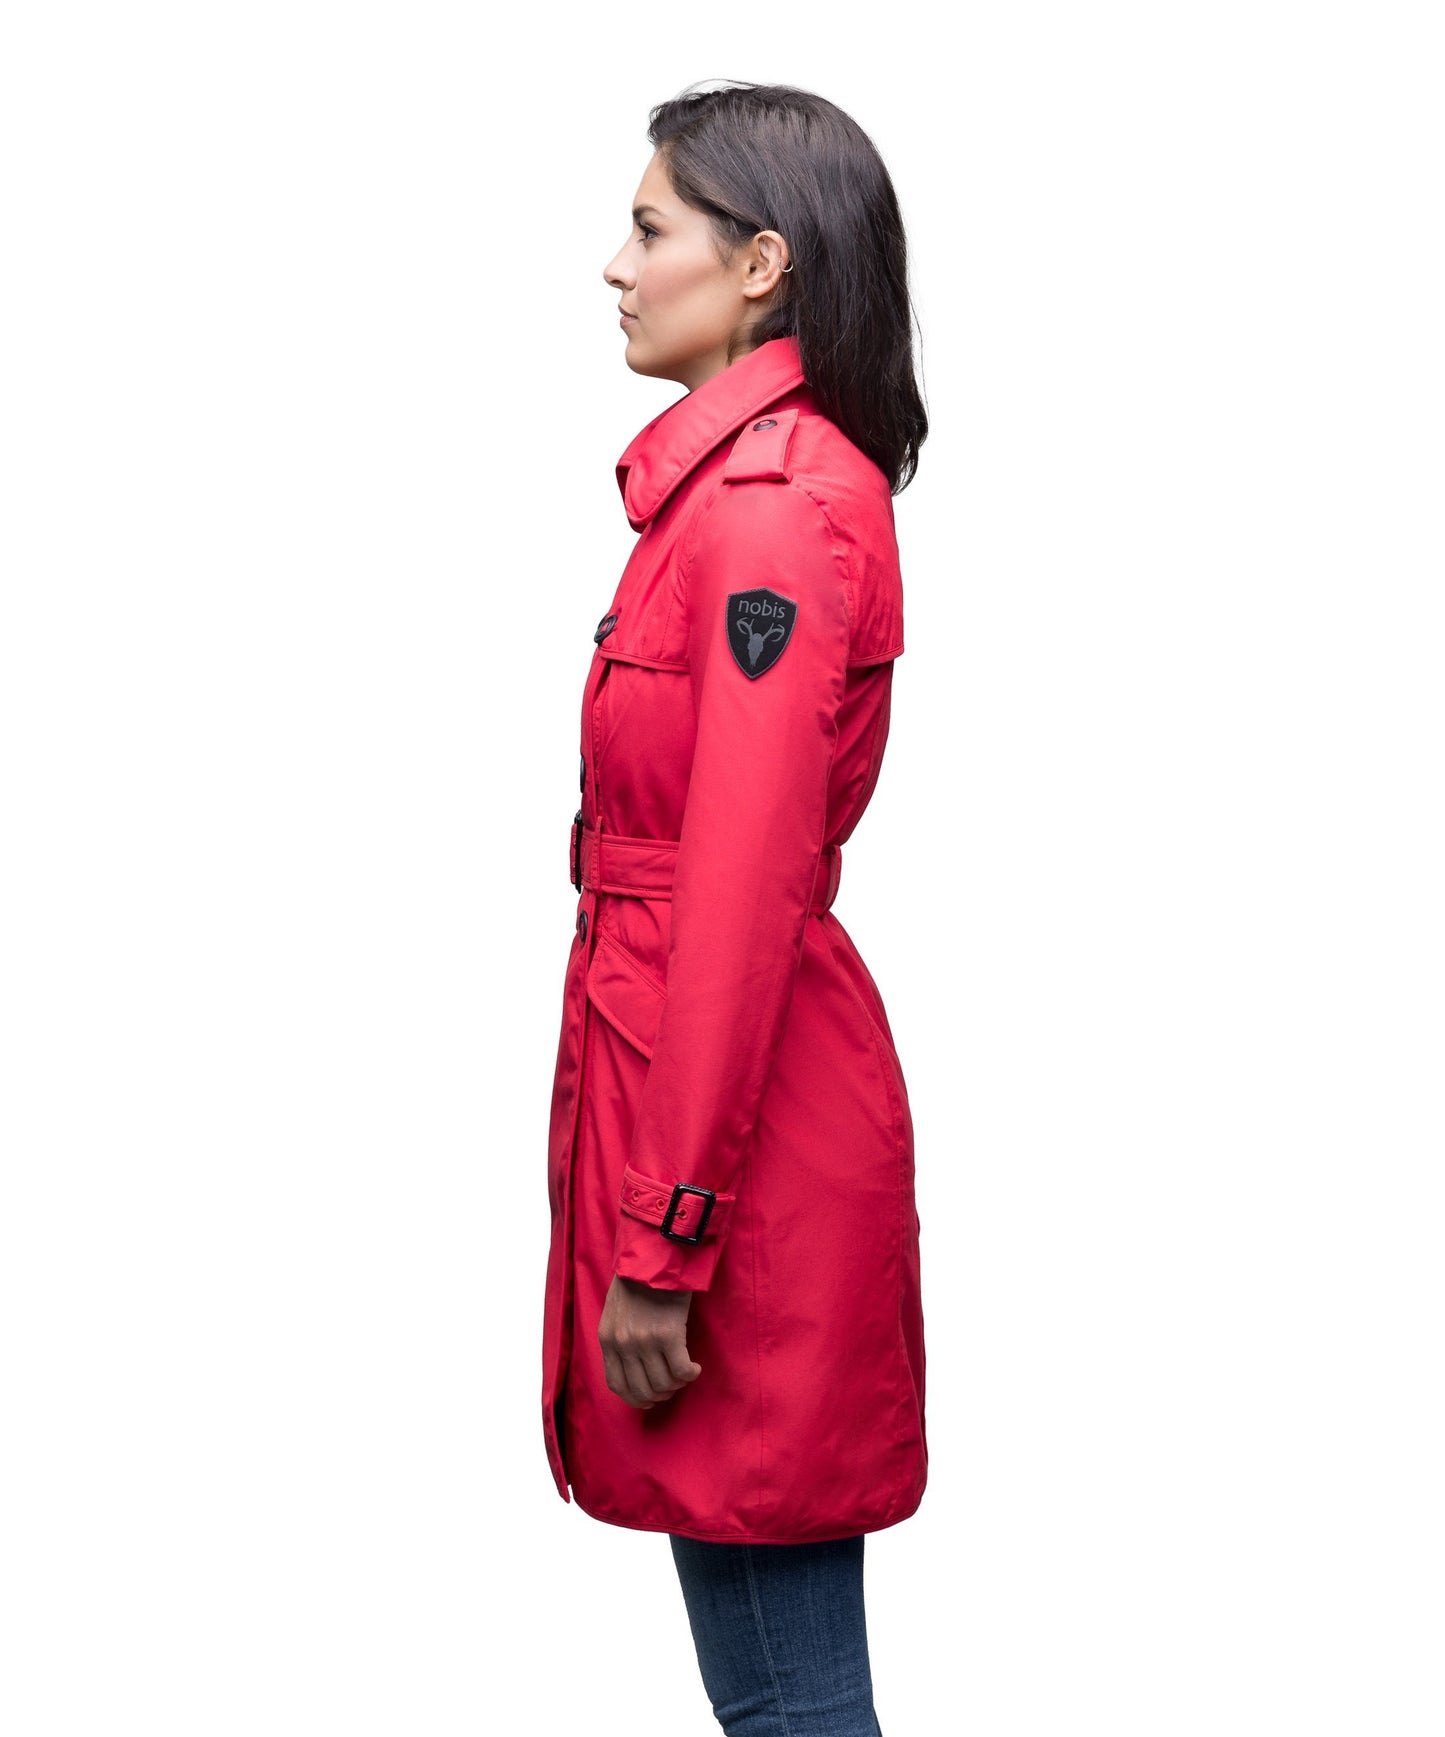 Women's classic trench coat that falls just above the knee in Red